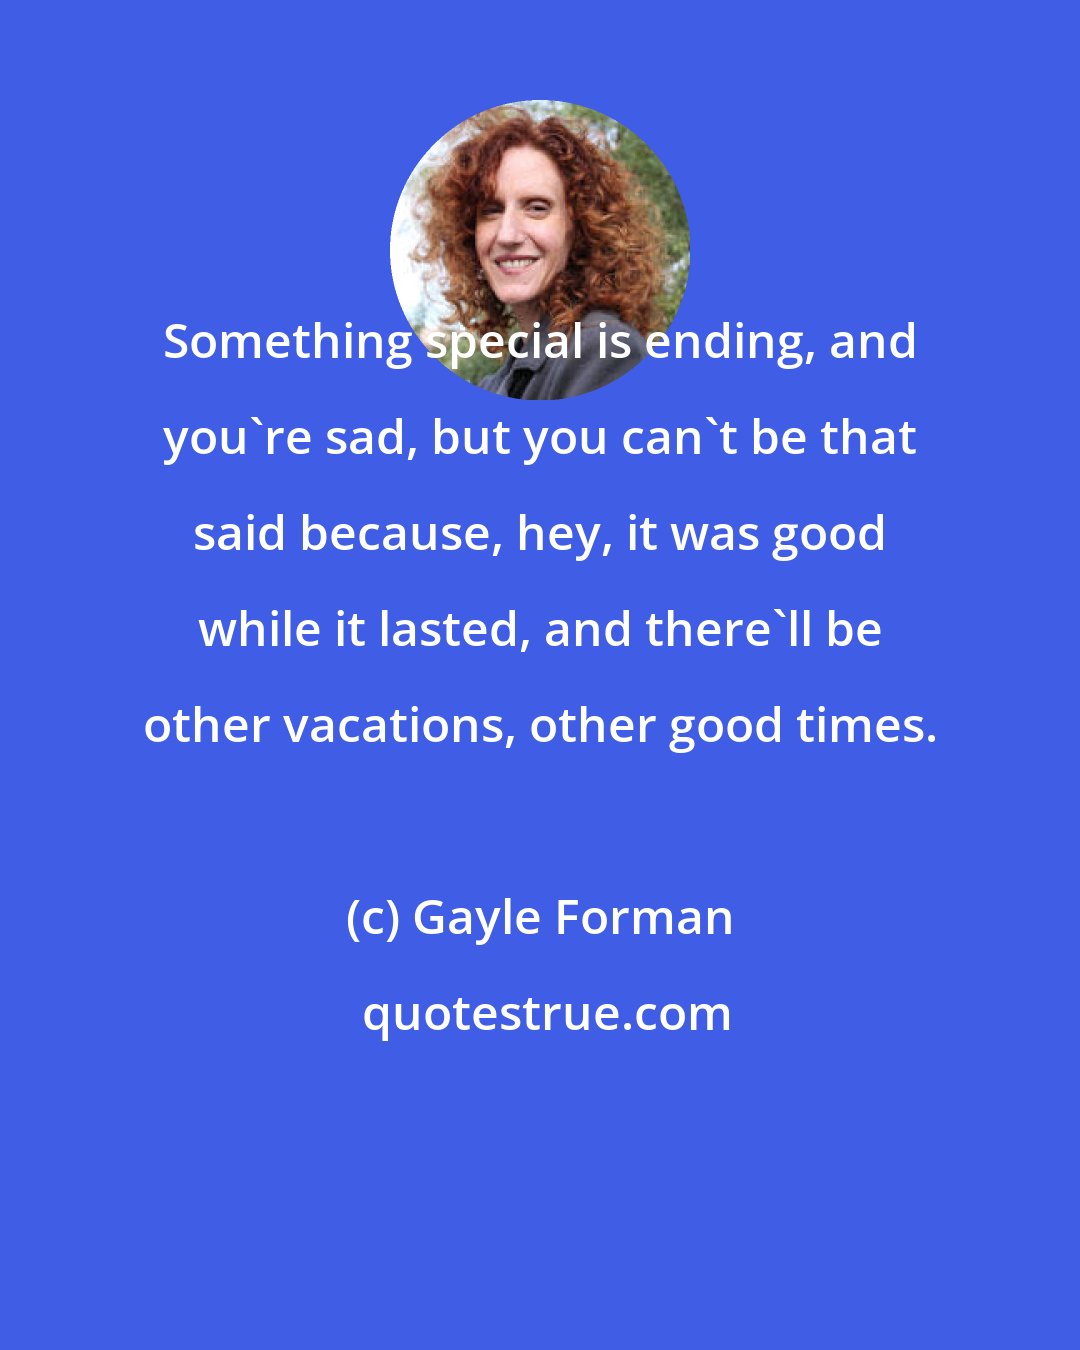 Gayle Forman: Something special is ending, and you're sad, but you can't be that said because, hey, it was good while it lasted, and there'll be other vacations, other good times.